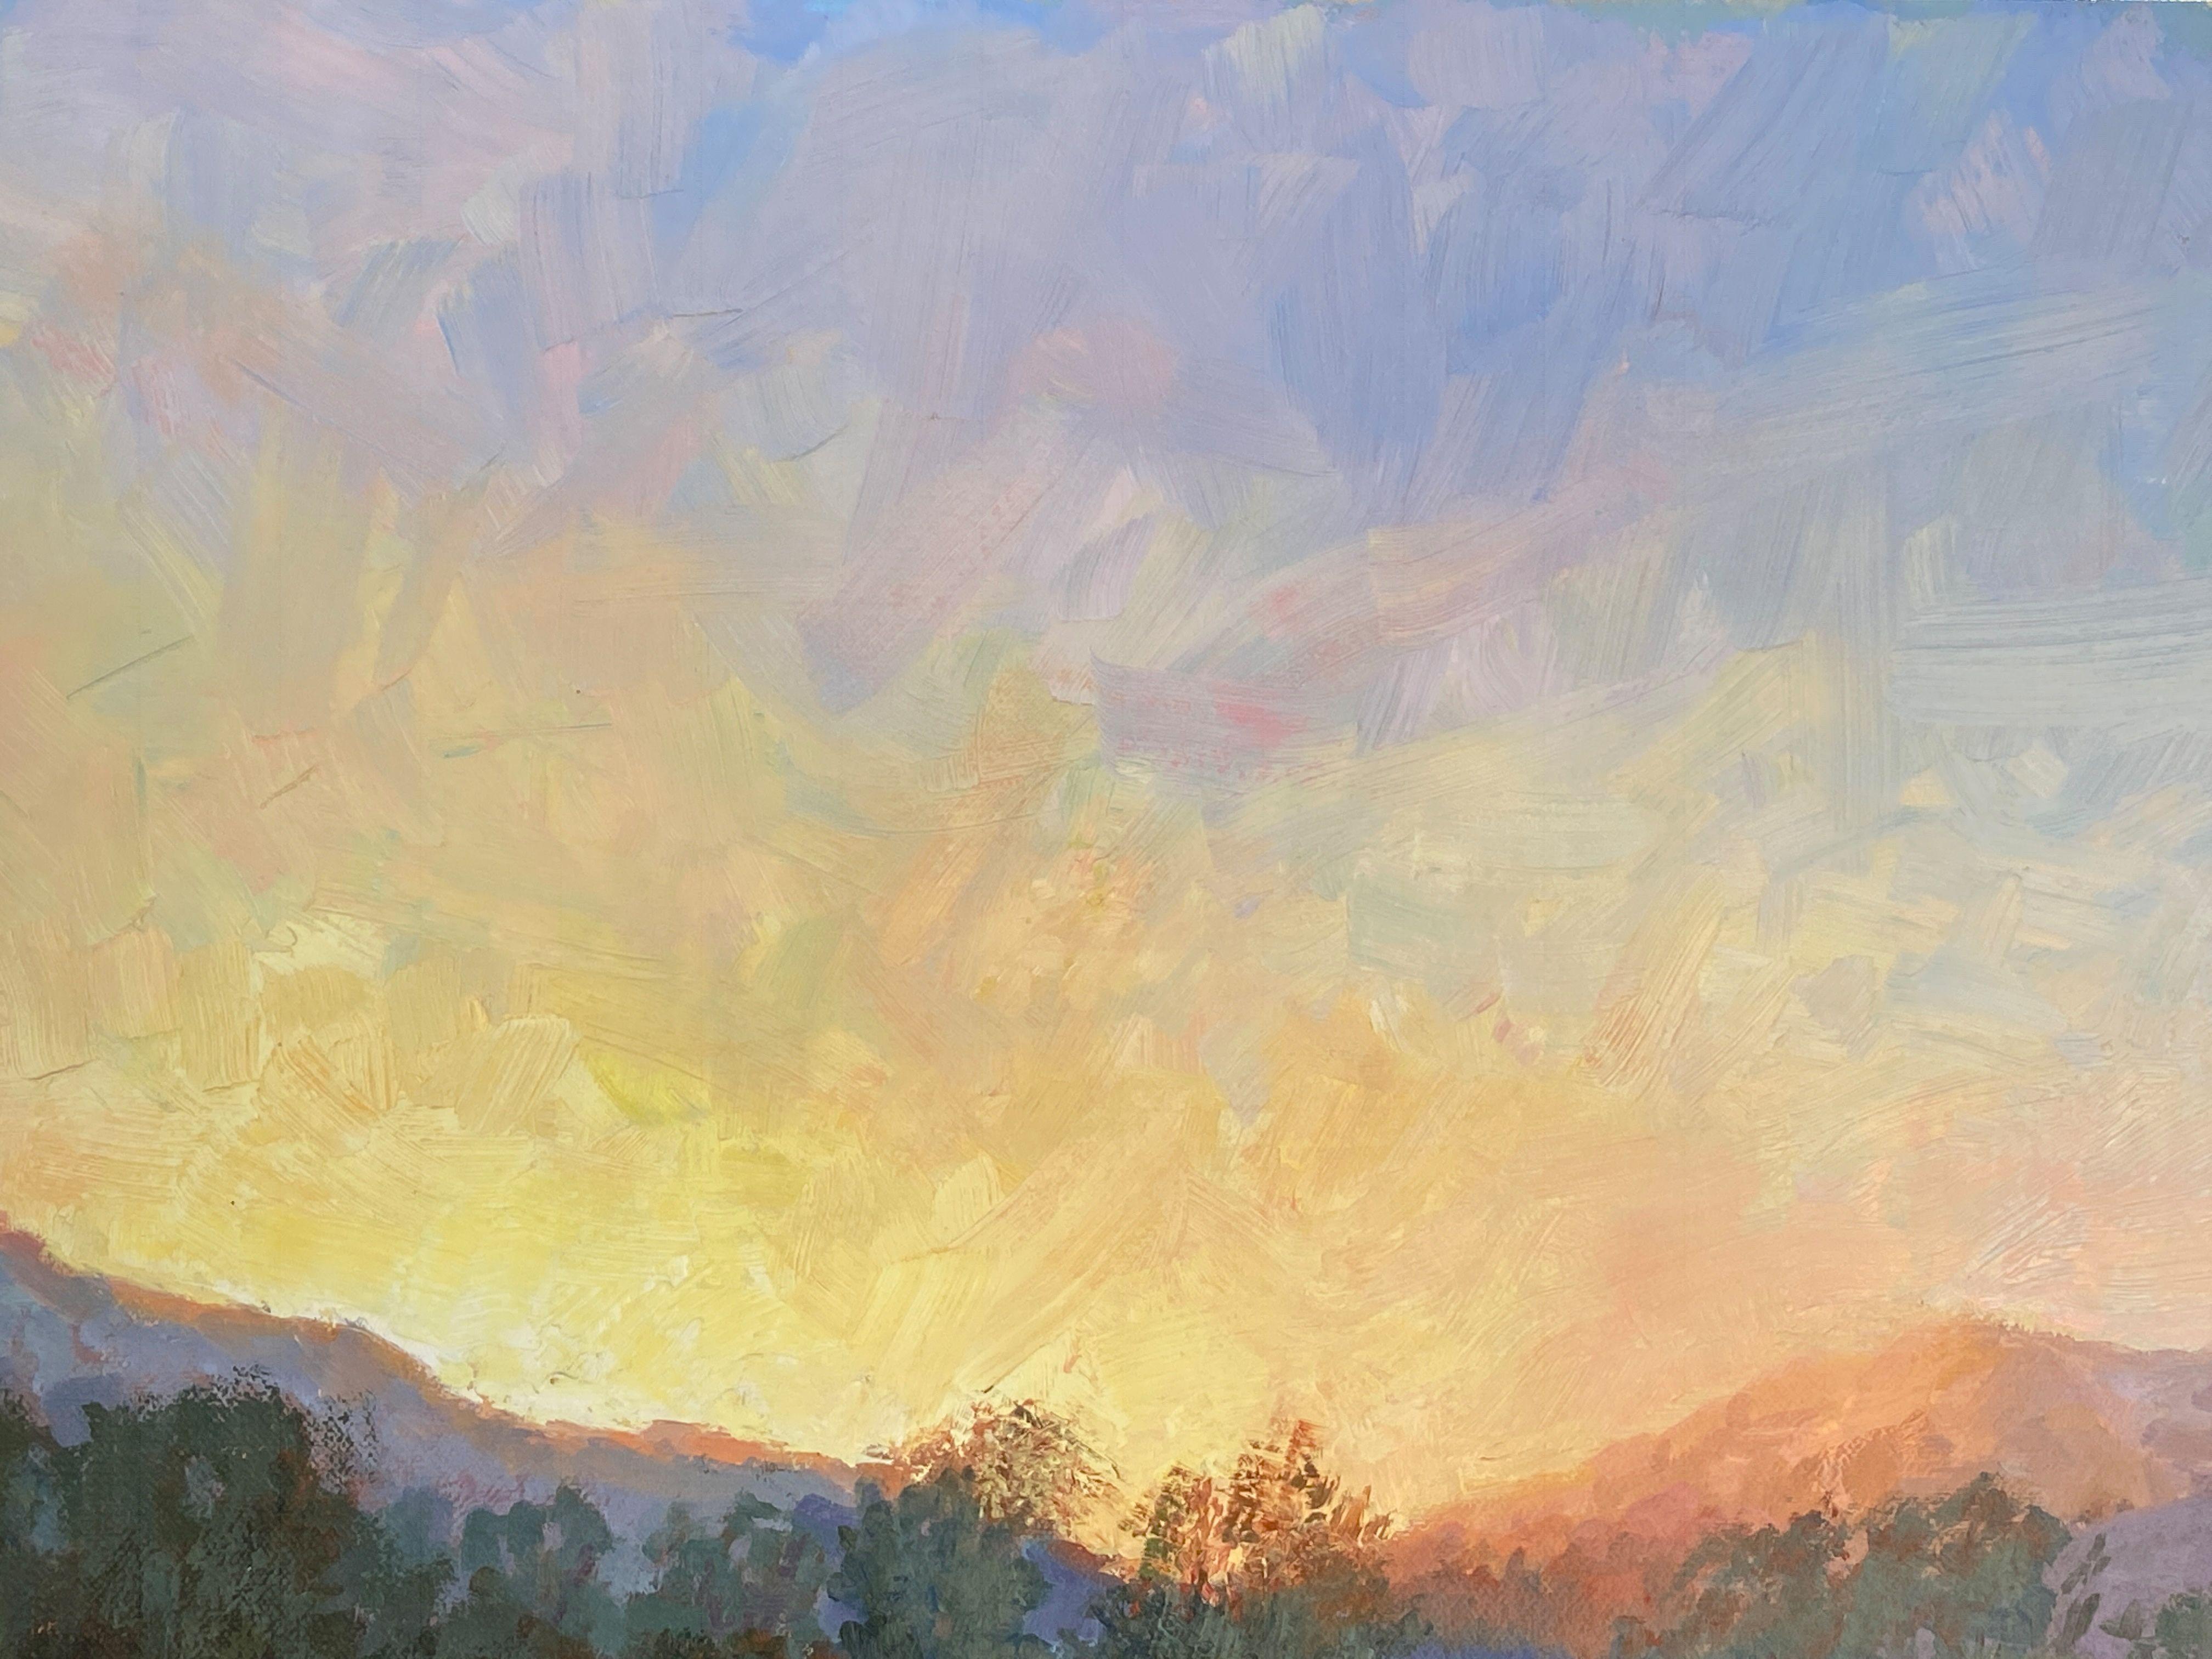 Mission Road Sunset, Painting, Oil on Canvas 2